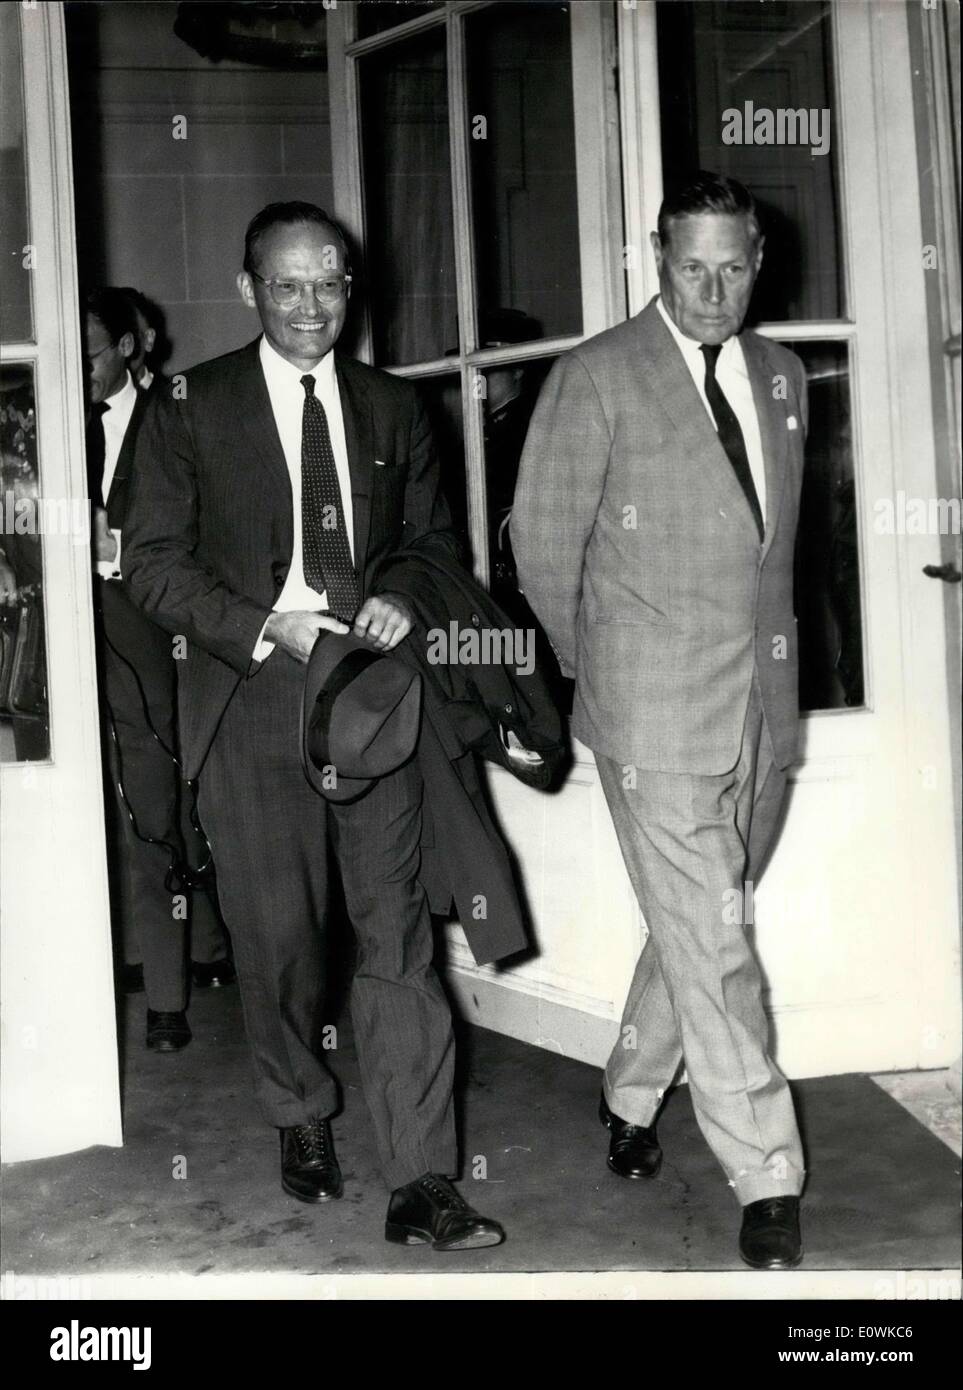 Jun. 27, 1963 - Kennedy's United States National Security Advisor, McGeorge  Bundy (left), is seen here with American Ambassador Stock Photo - Alamy